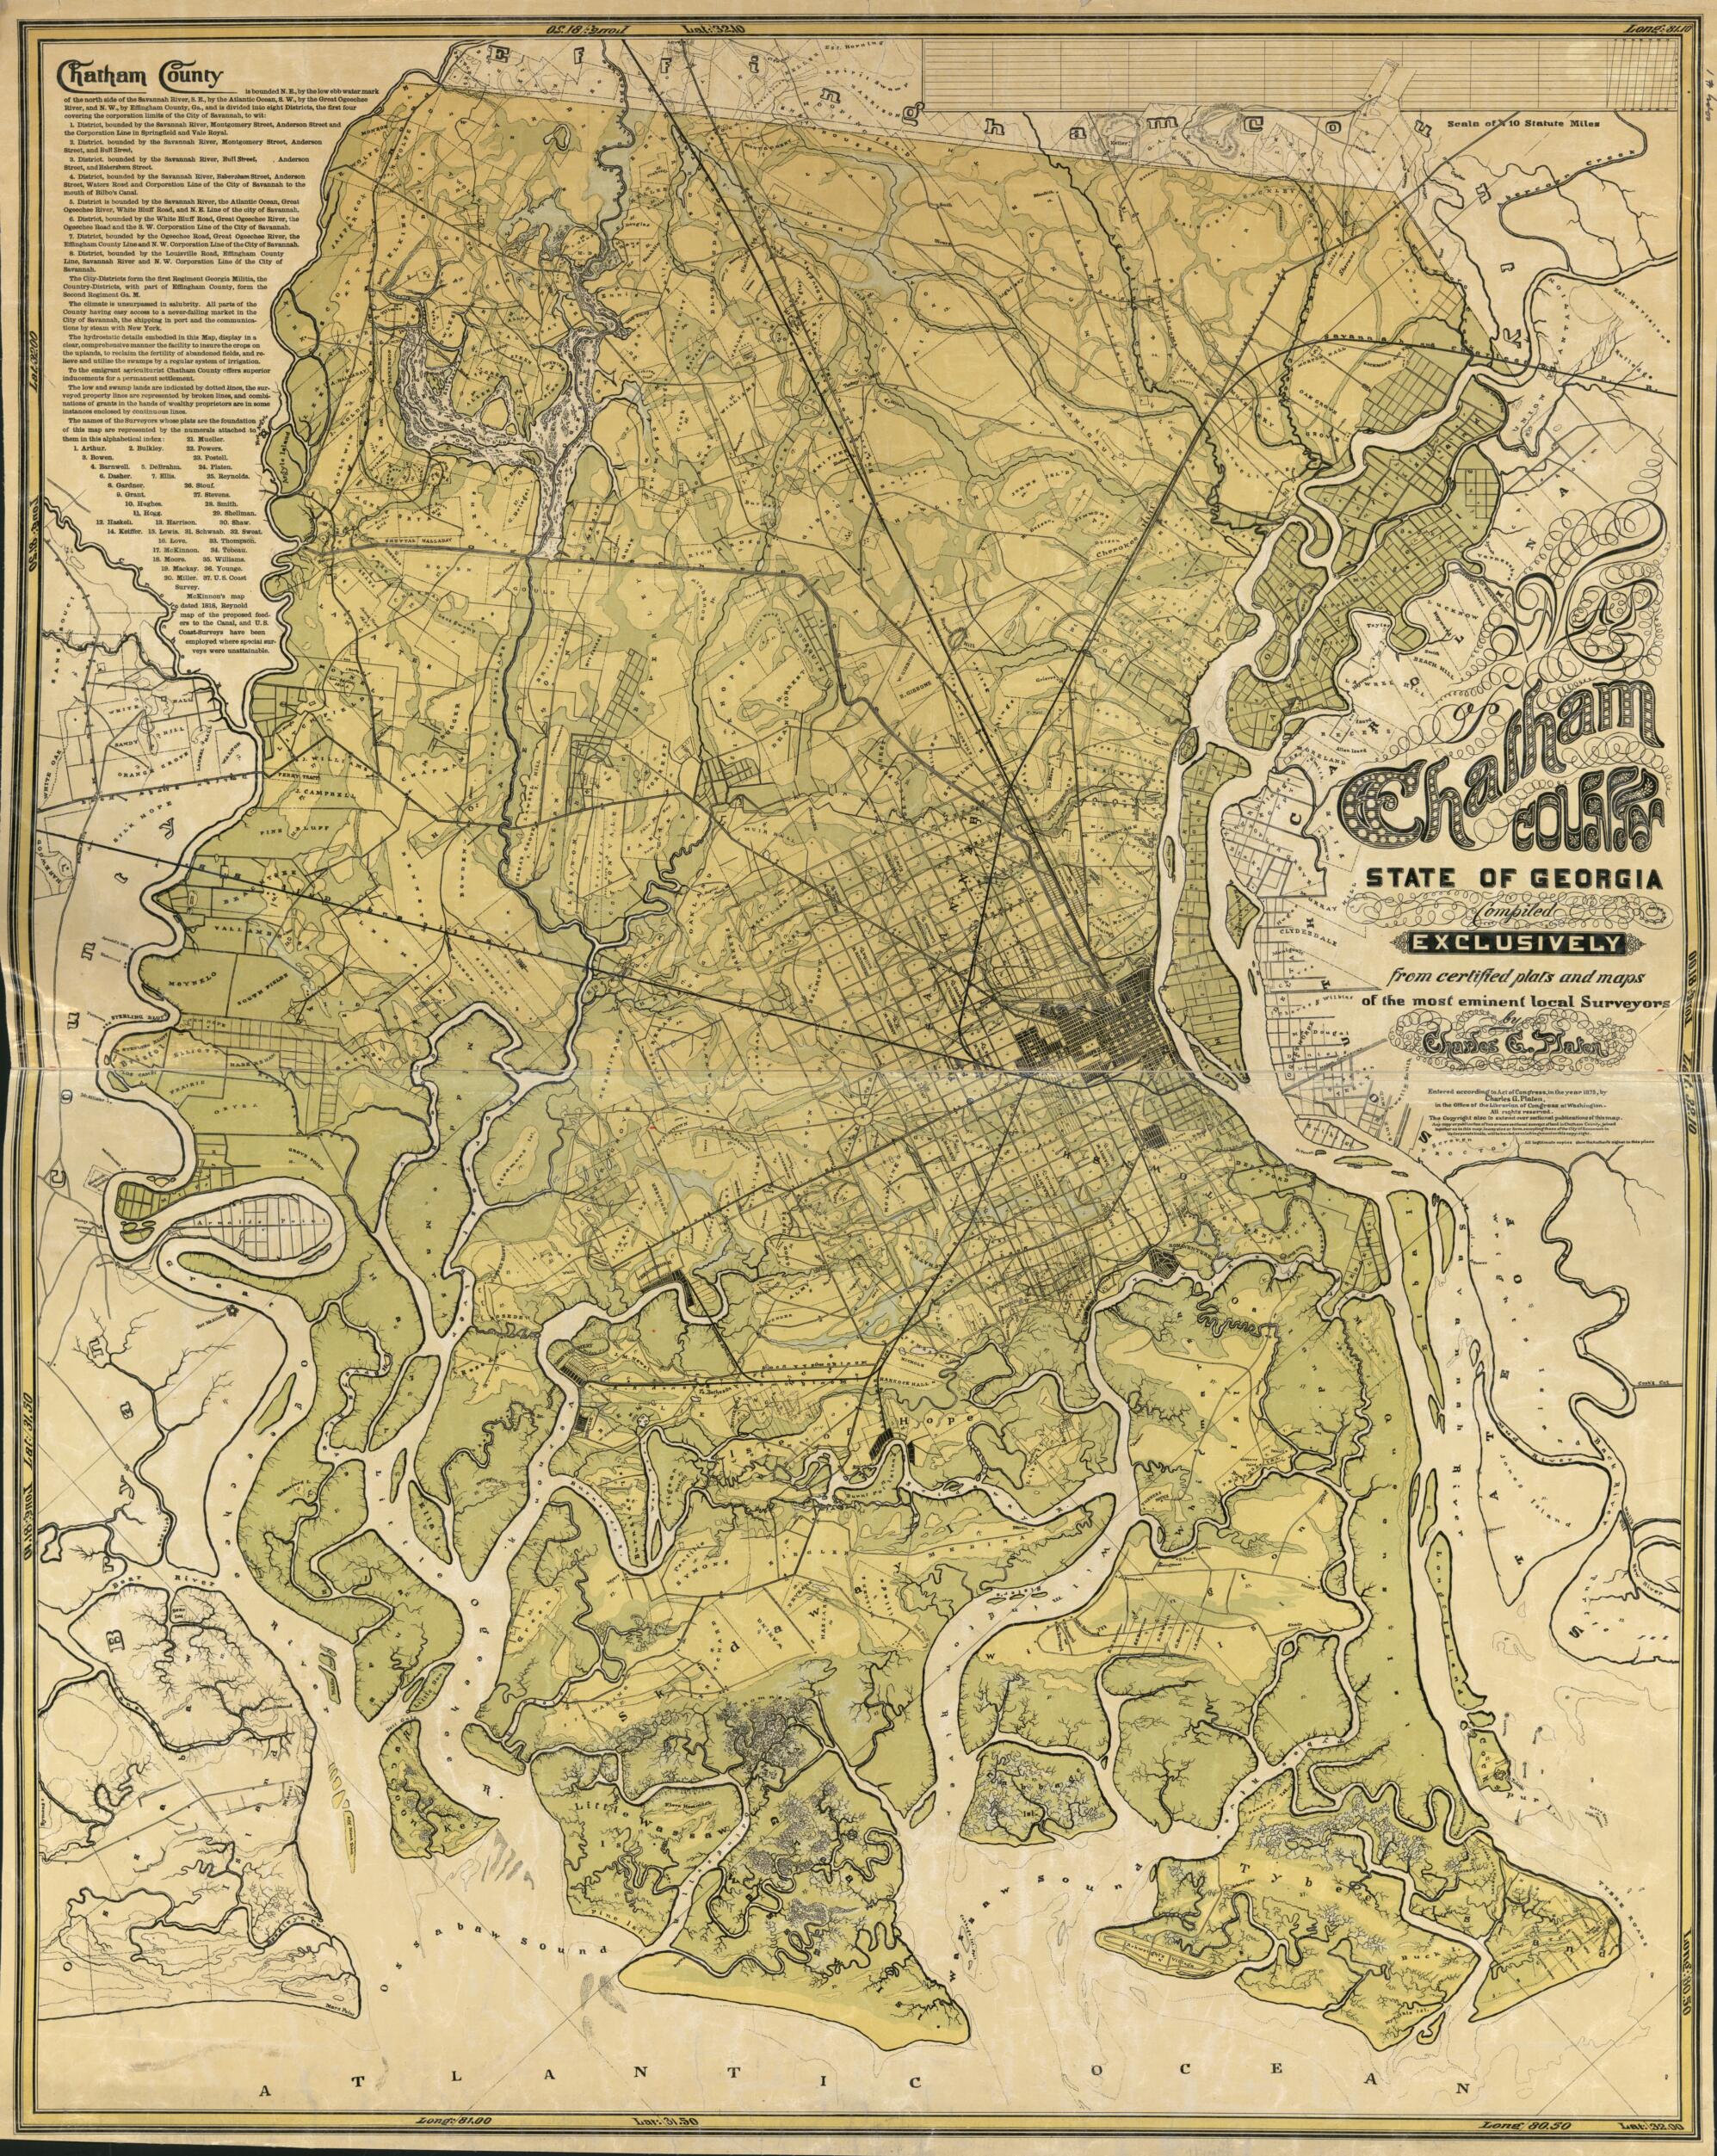 This old map of Map of Chatham County, State of Georgia from 1875 was created by Charles G. Platen in 1875